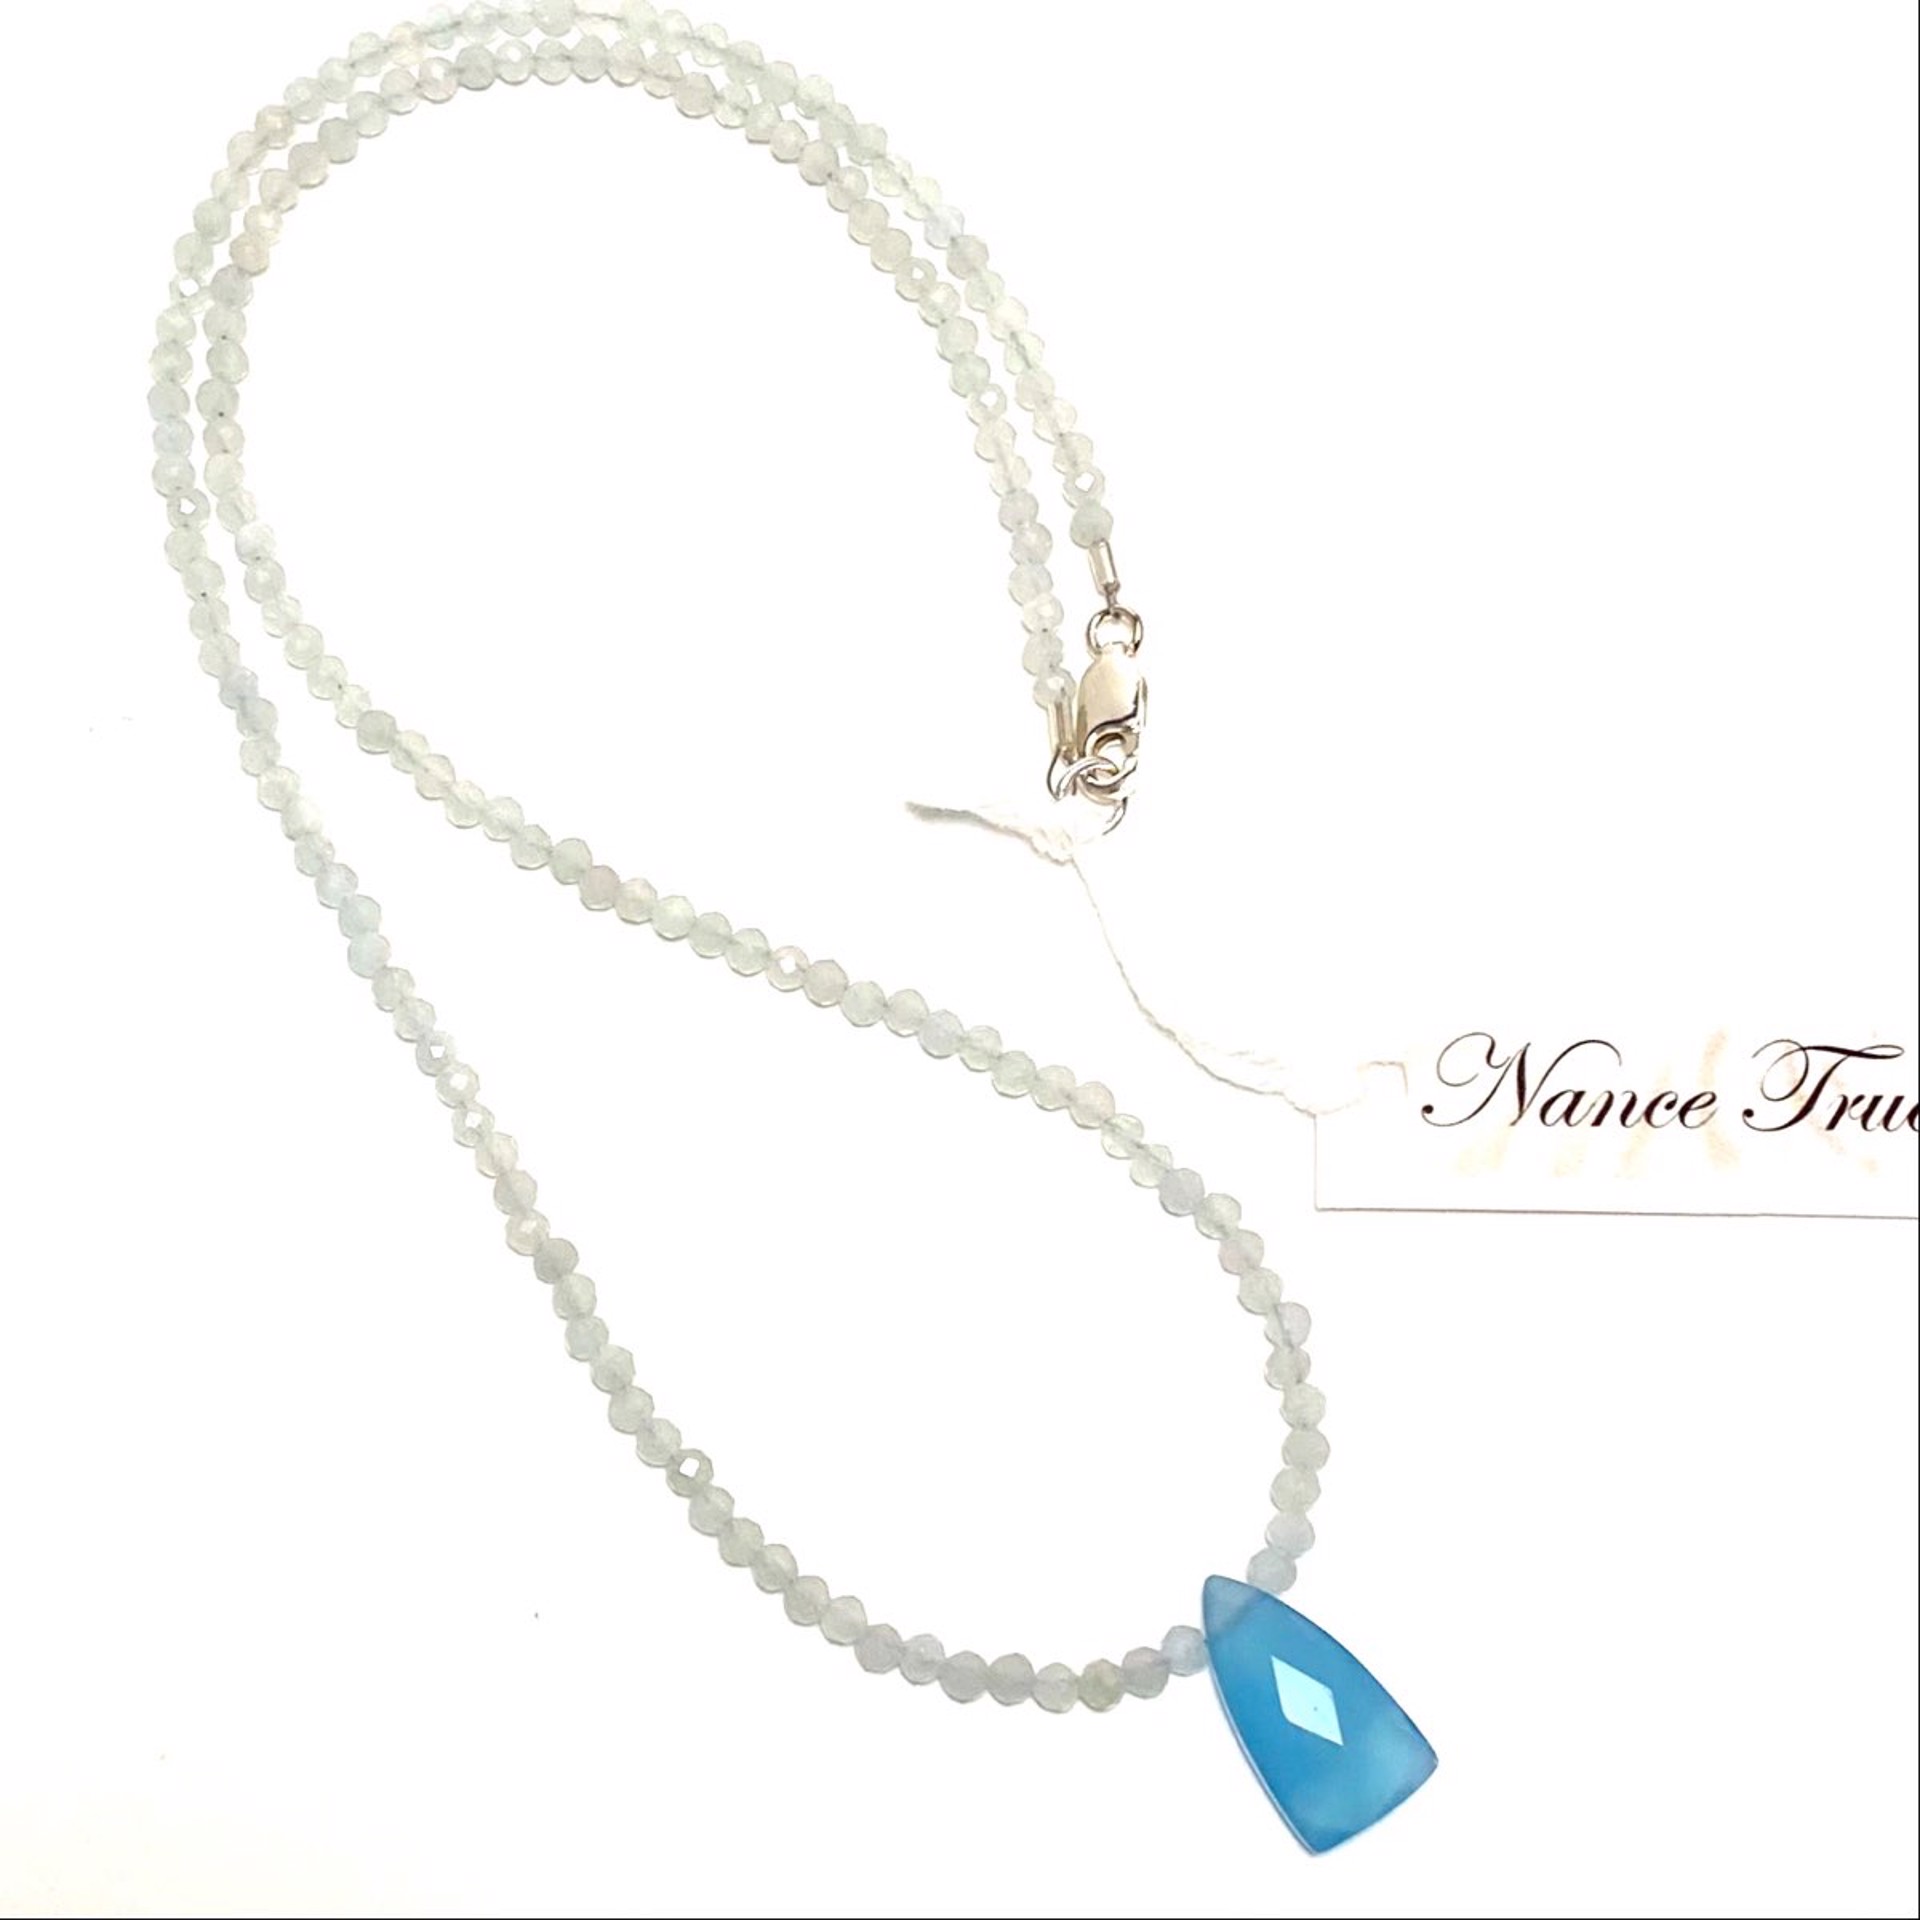 NT22-182 Tiny Faceted Aquamarine Blue Chalcedony Drop Necklace by Nance Trueworthy